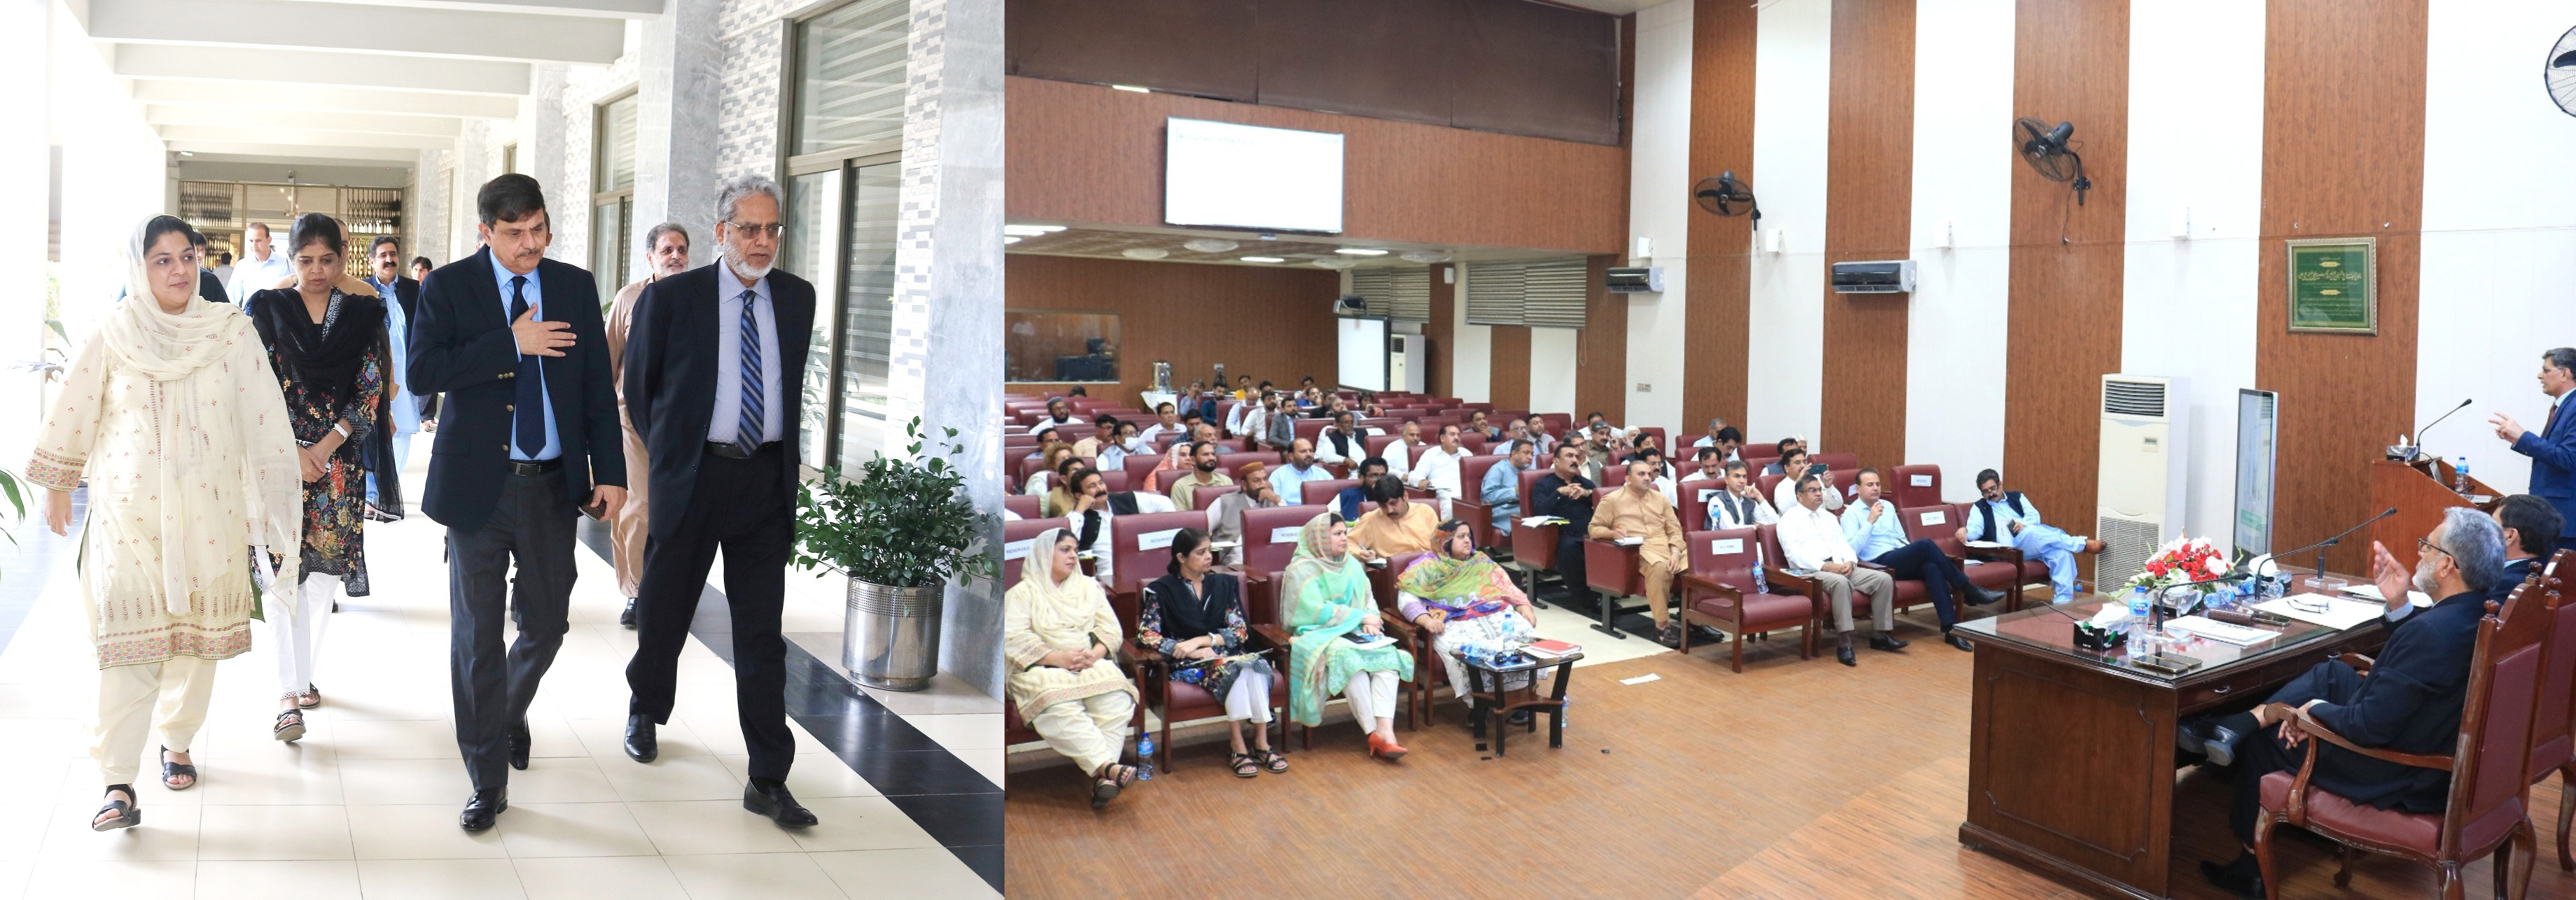 CEO conference was held at QAED under the chairmanship of Minister and Secretary, SED Punjab.